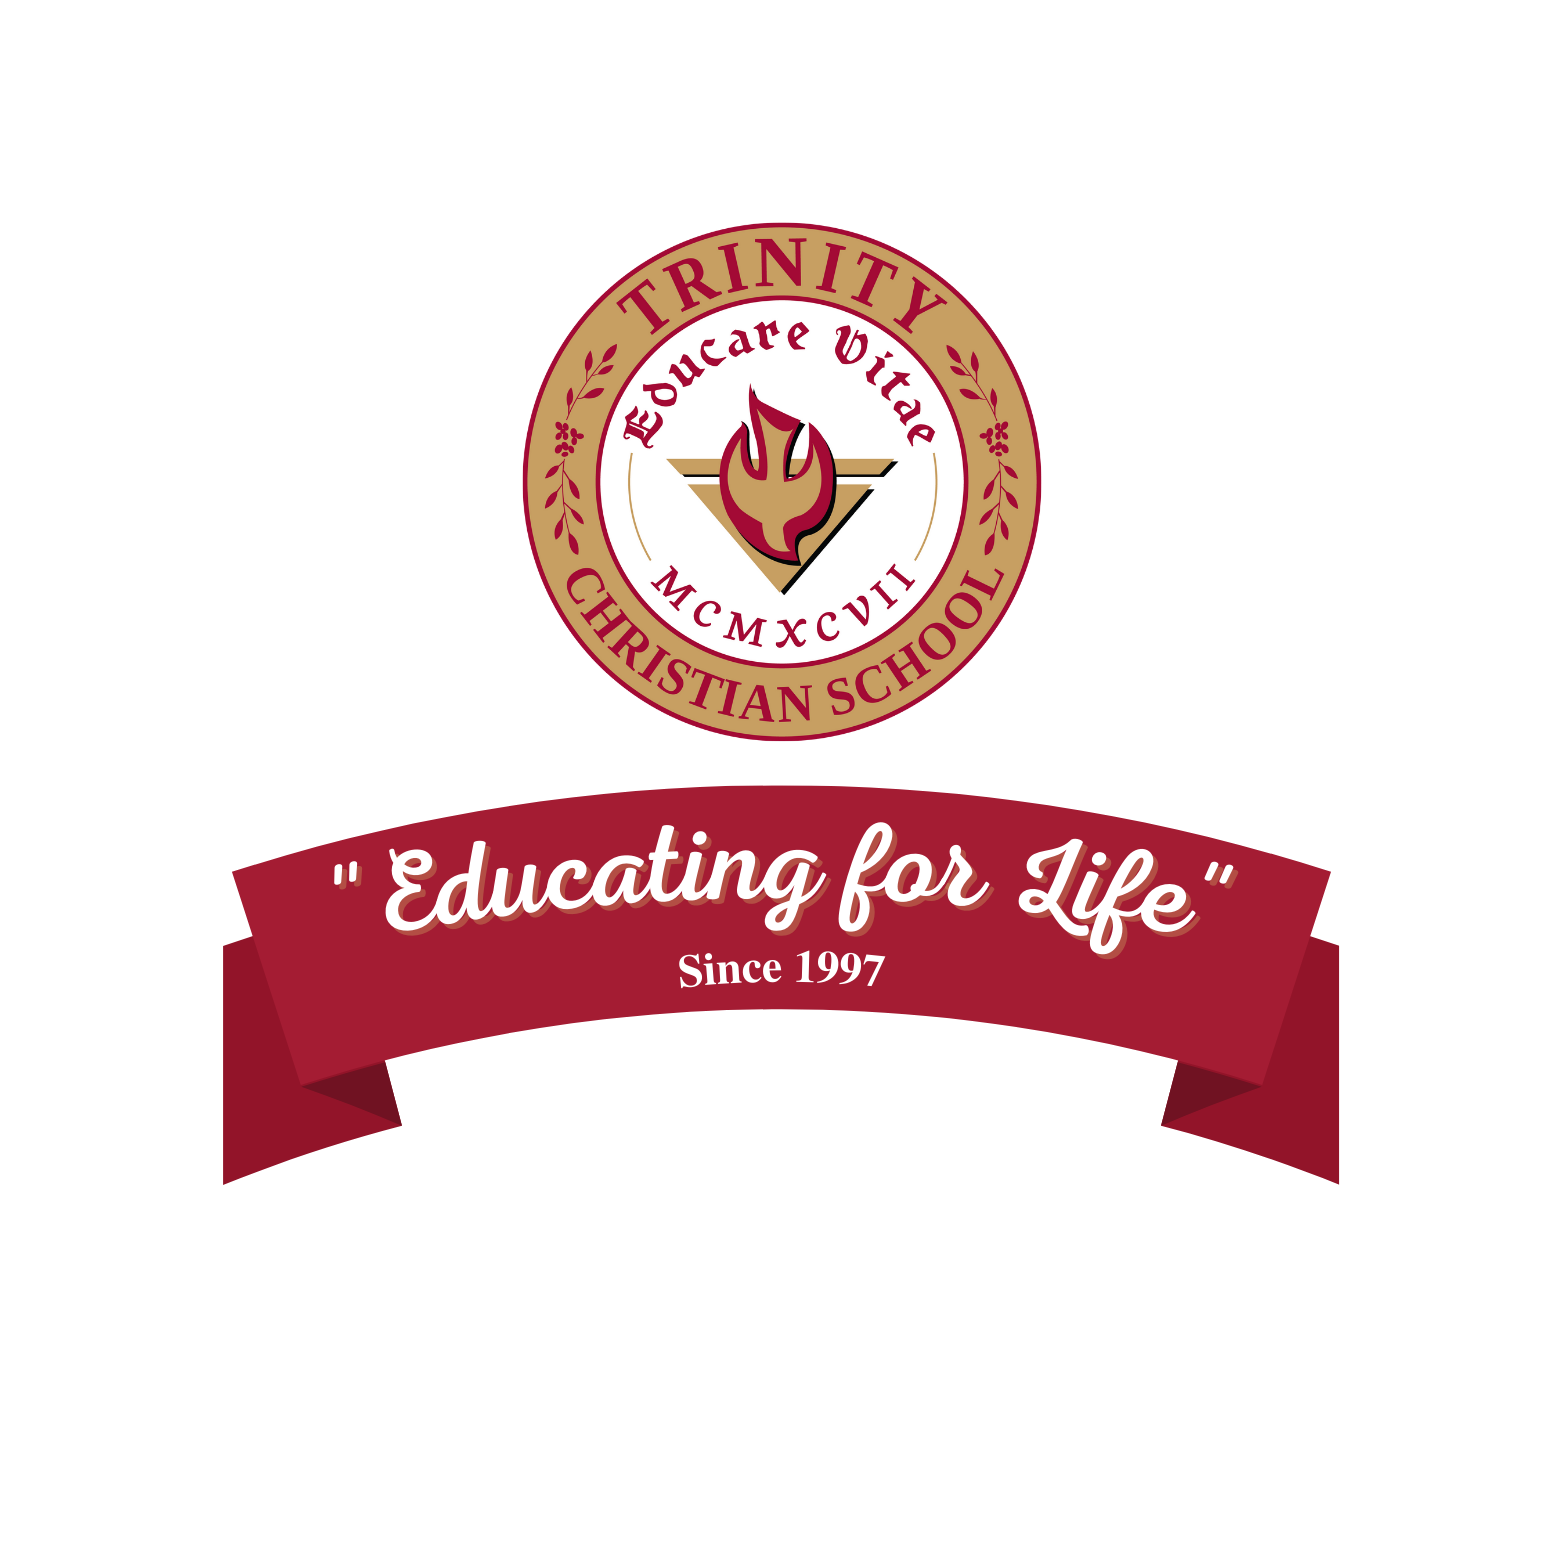 25 Years "Educating for Life"